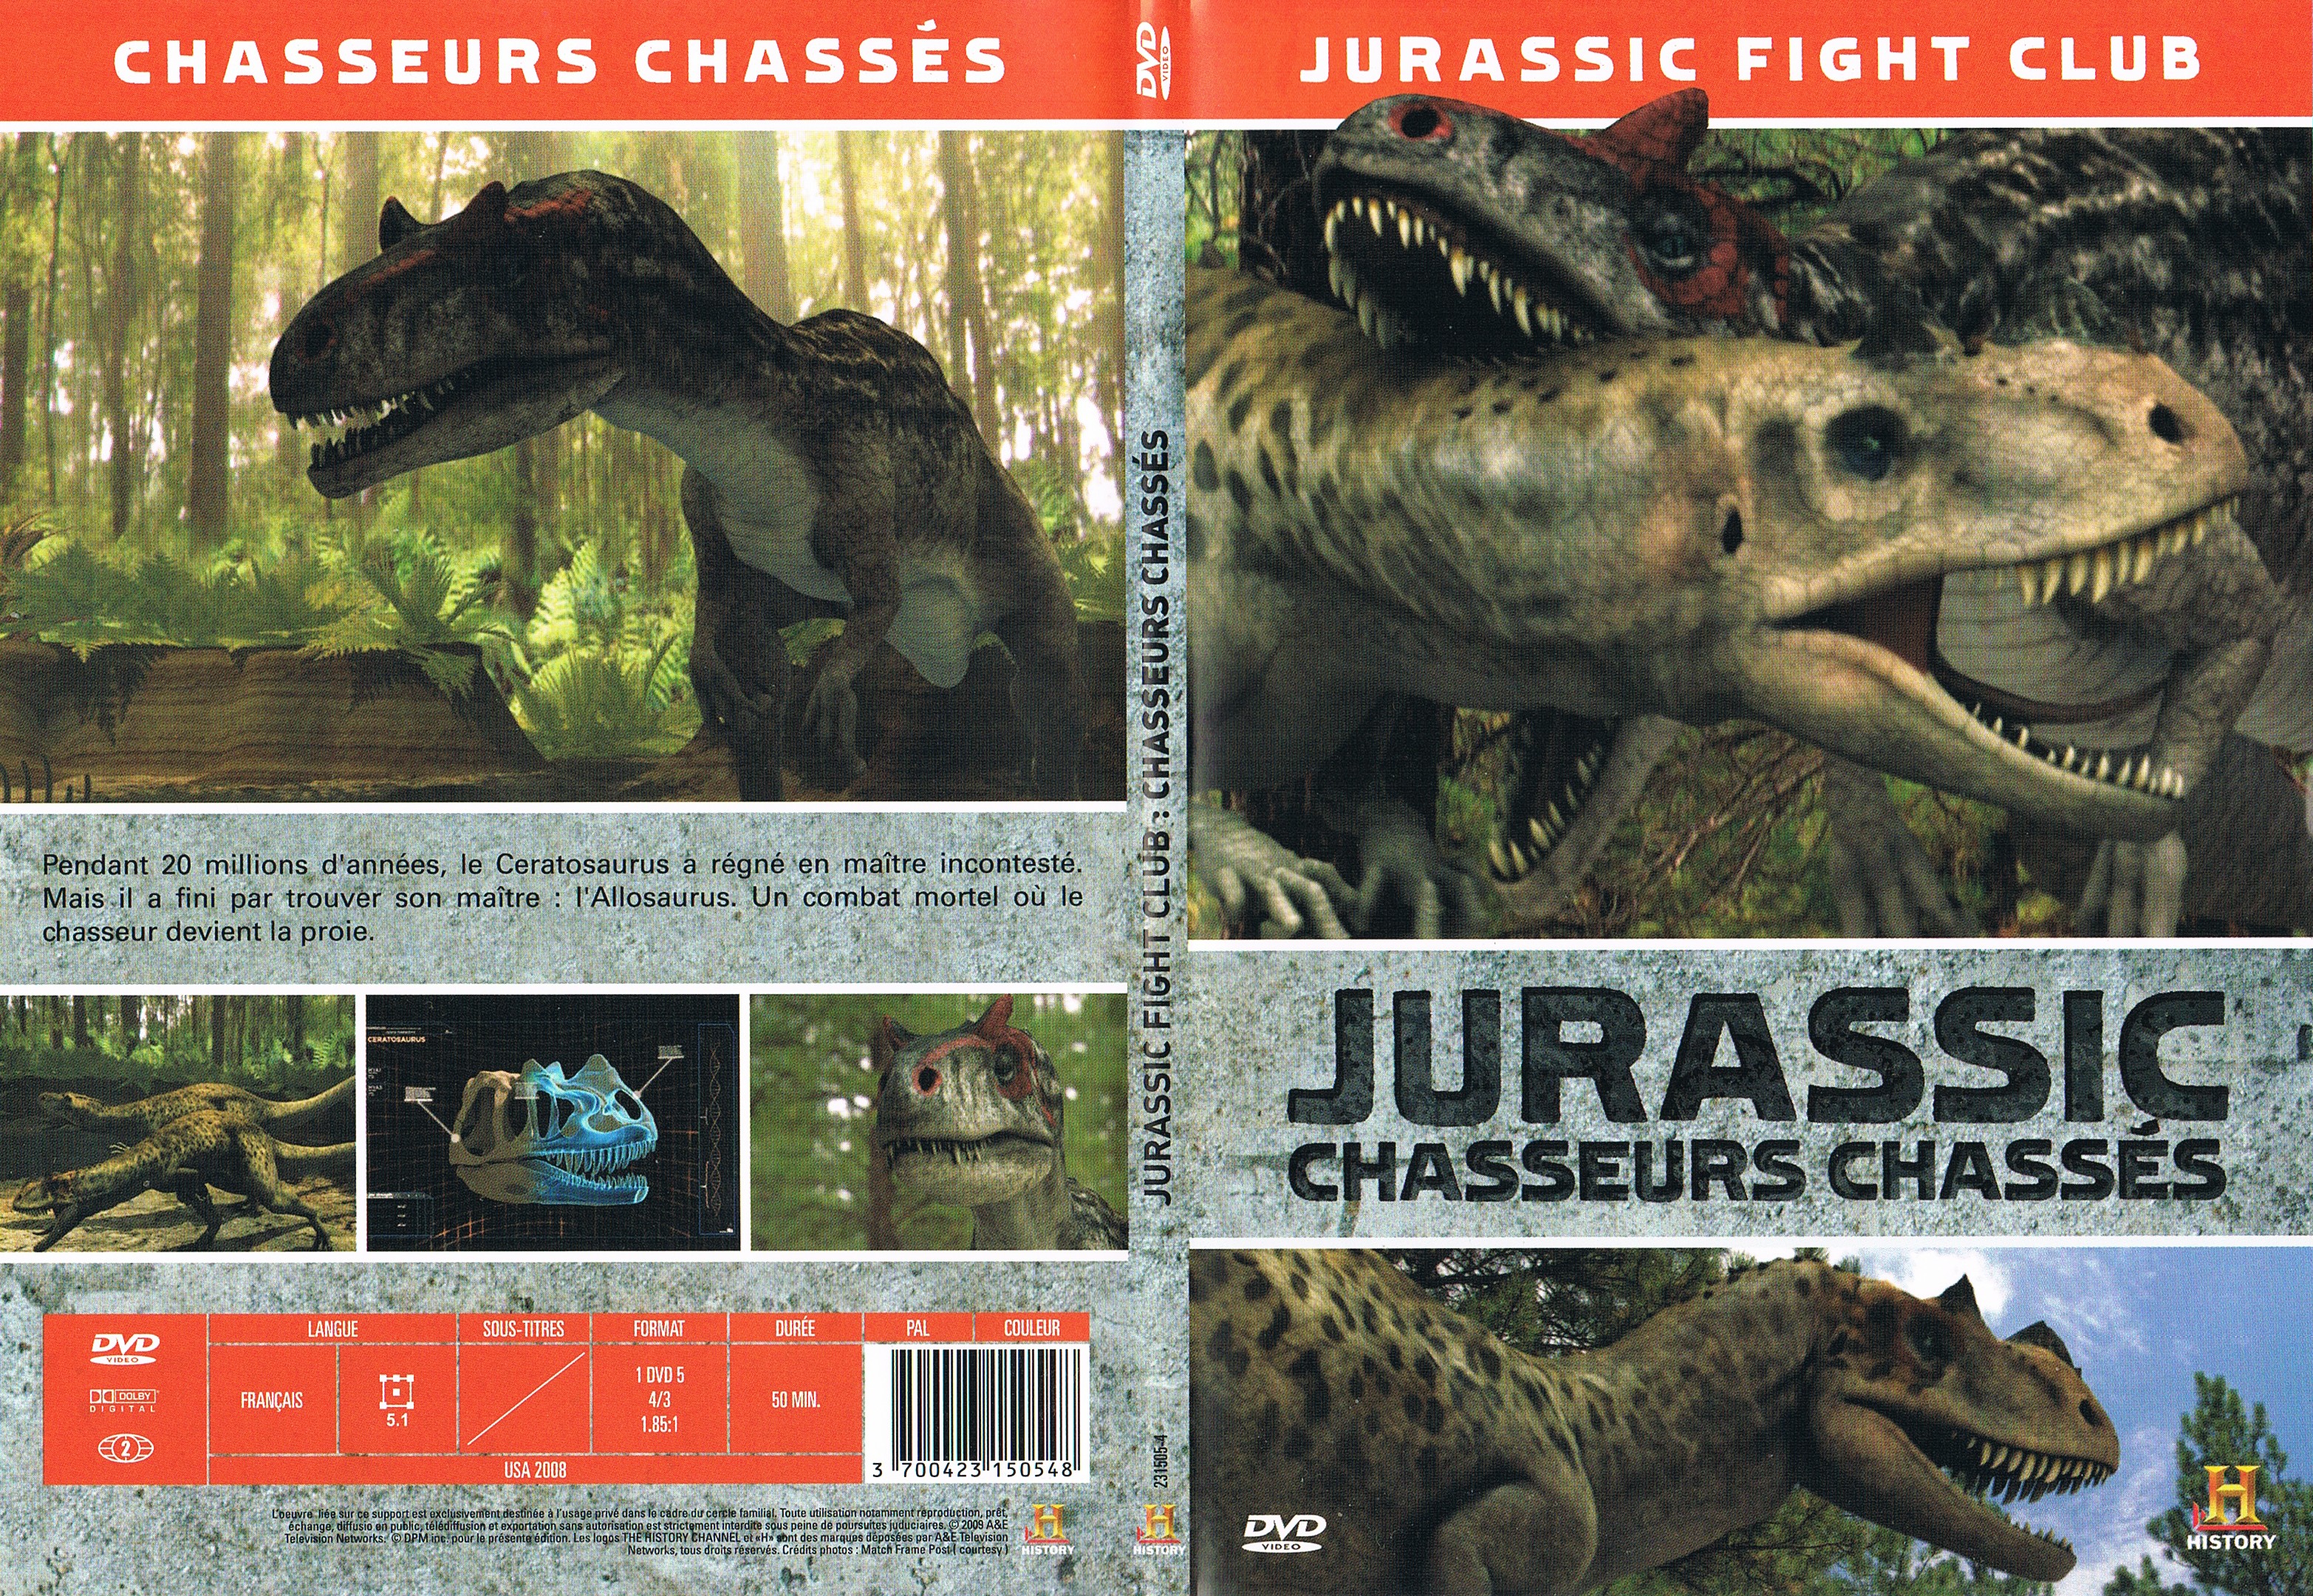 Jaquette DVD Jurassic Fight Club - Chasseurs Chasss